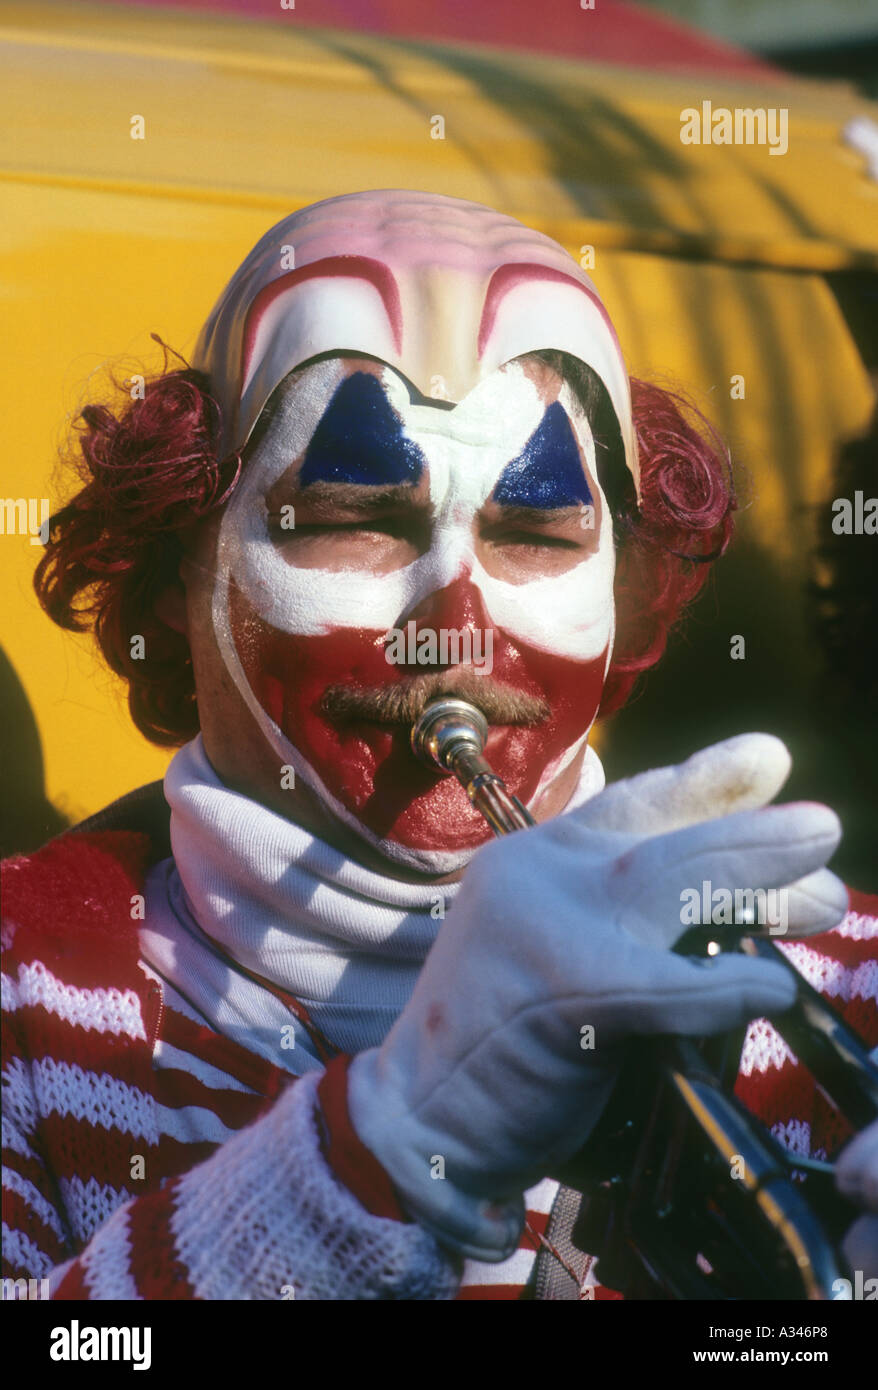 A band member in the festival in Cologne, Germany, is made up as a clown  Stock Photo - Alamy